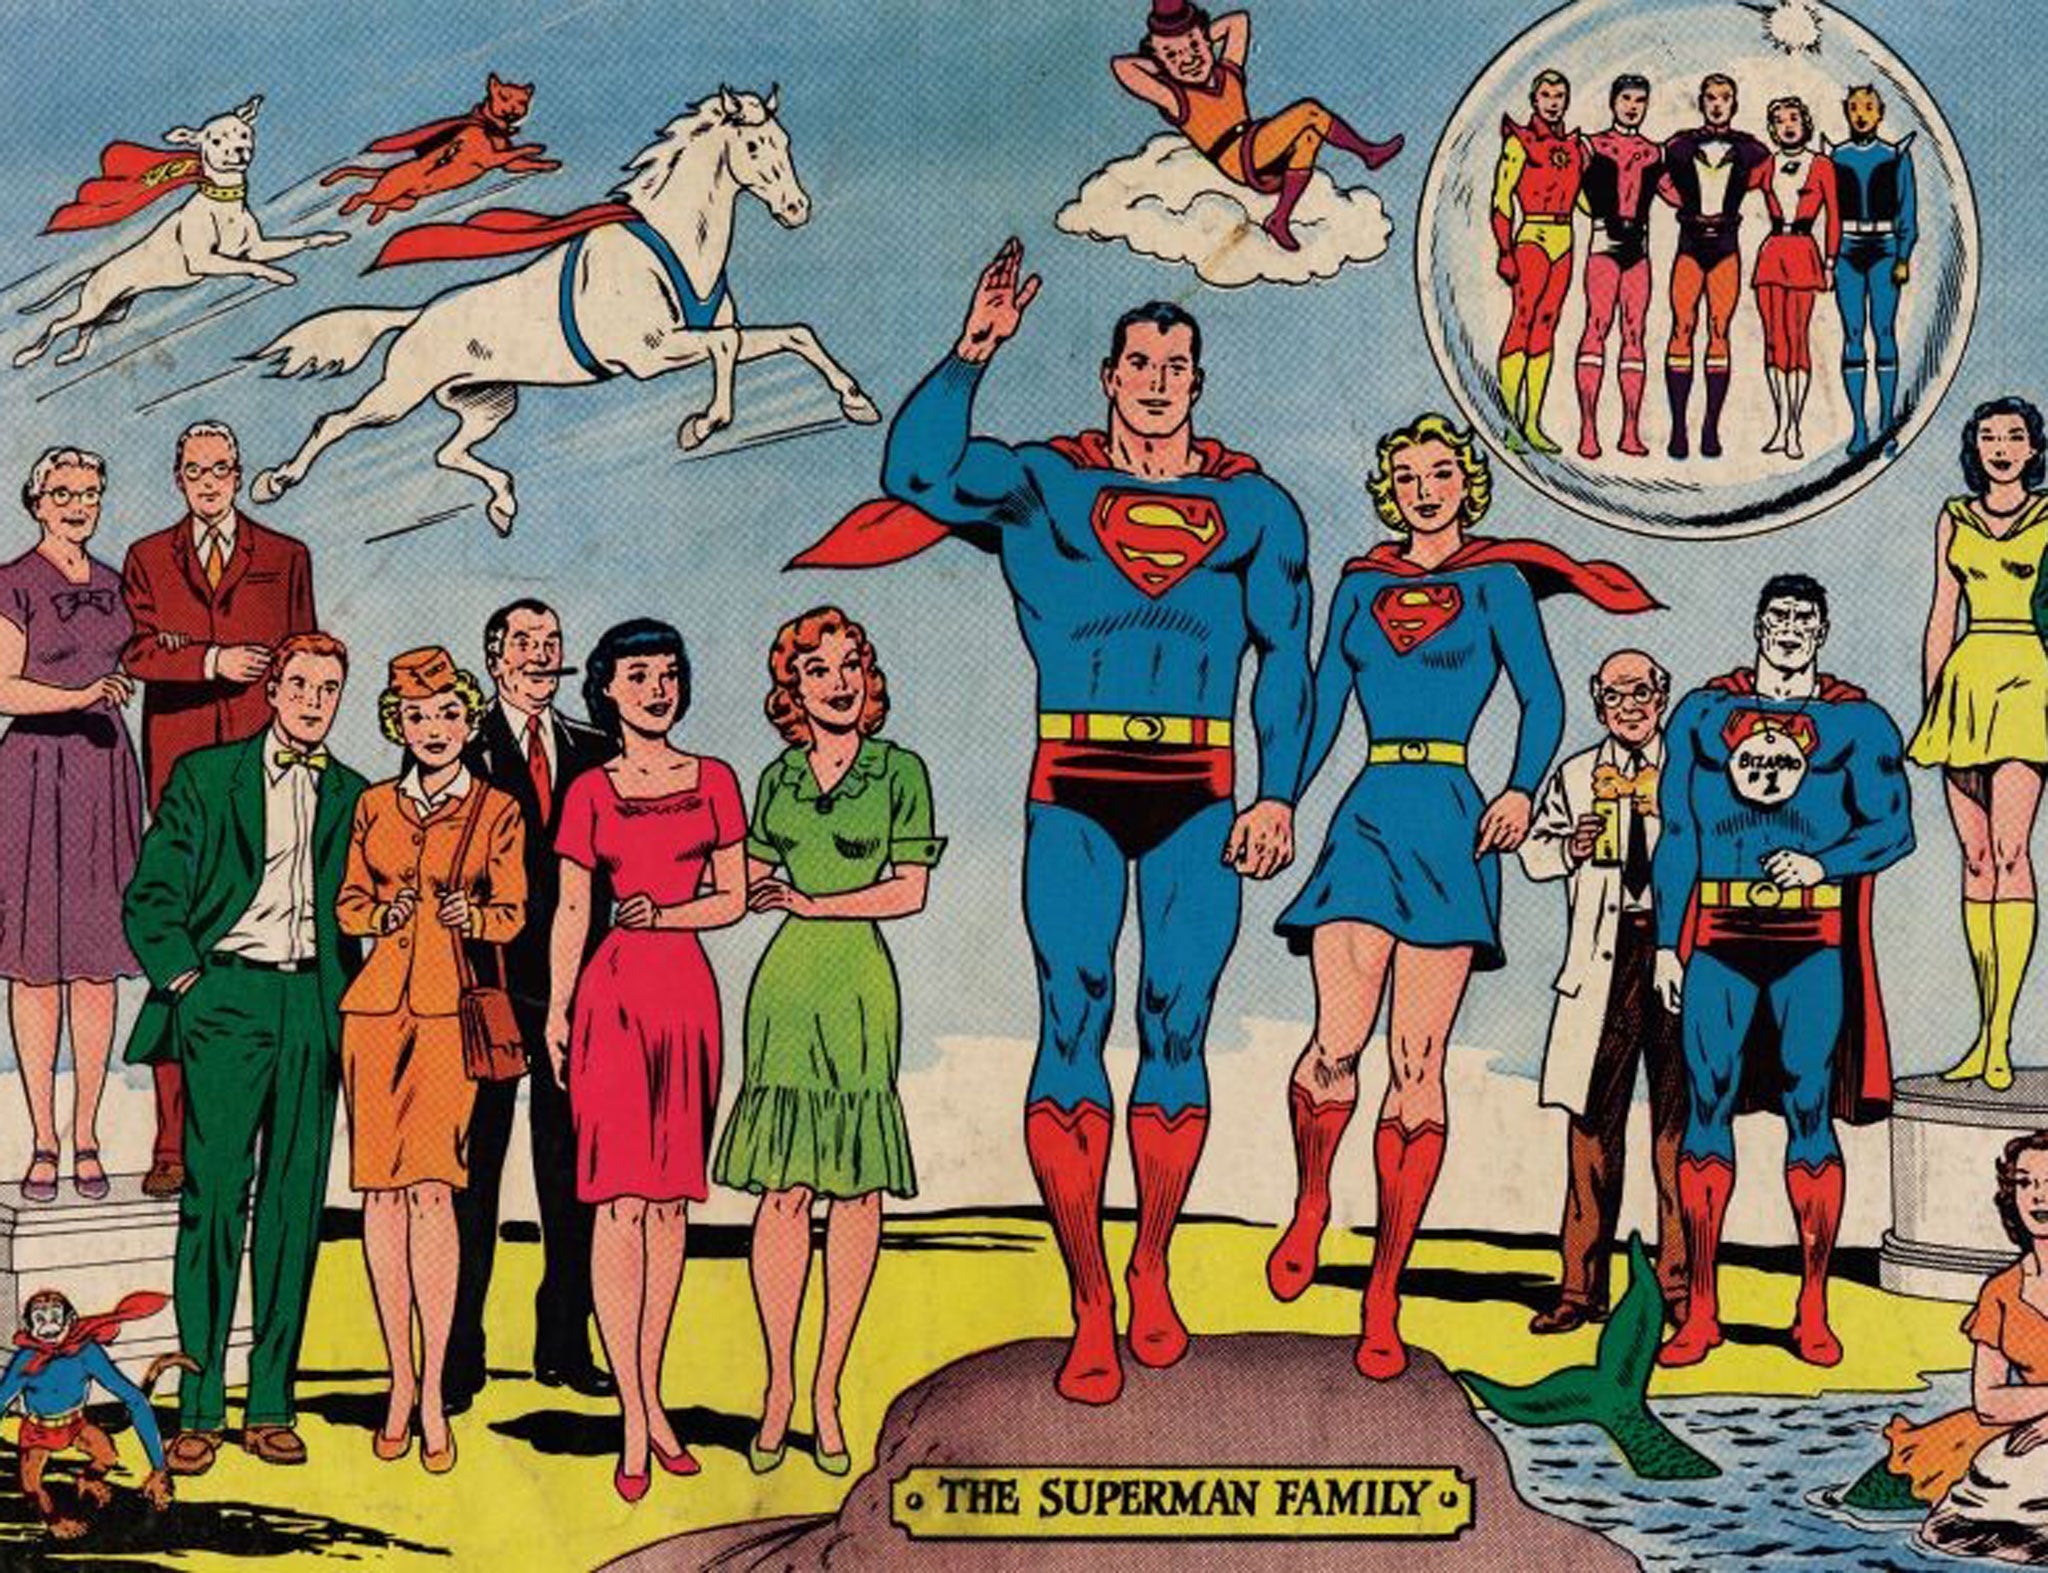 Superman and his “family” from a 1962 annual